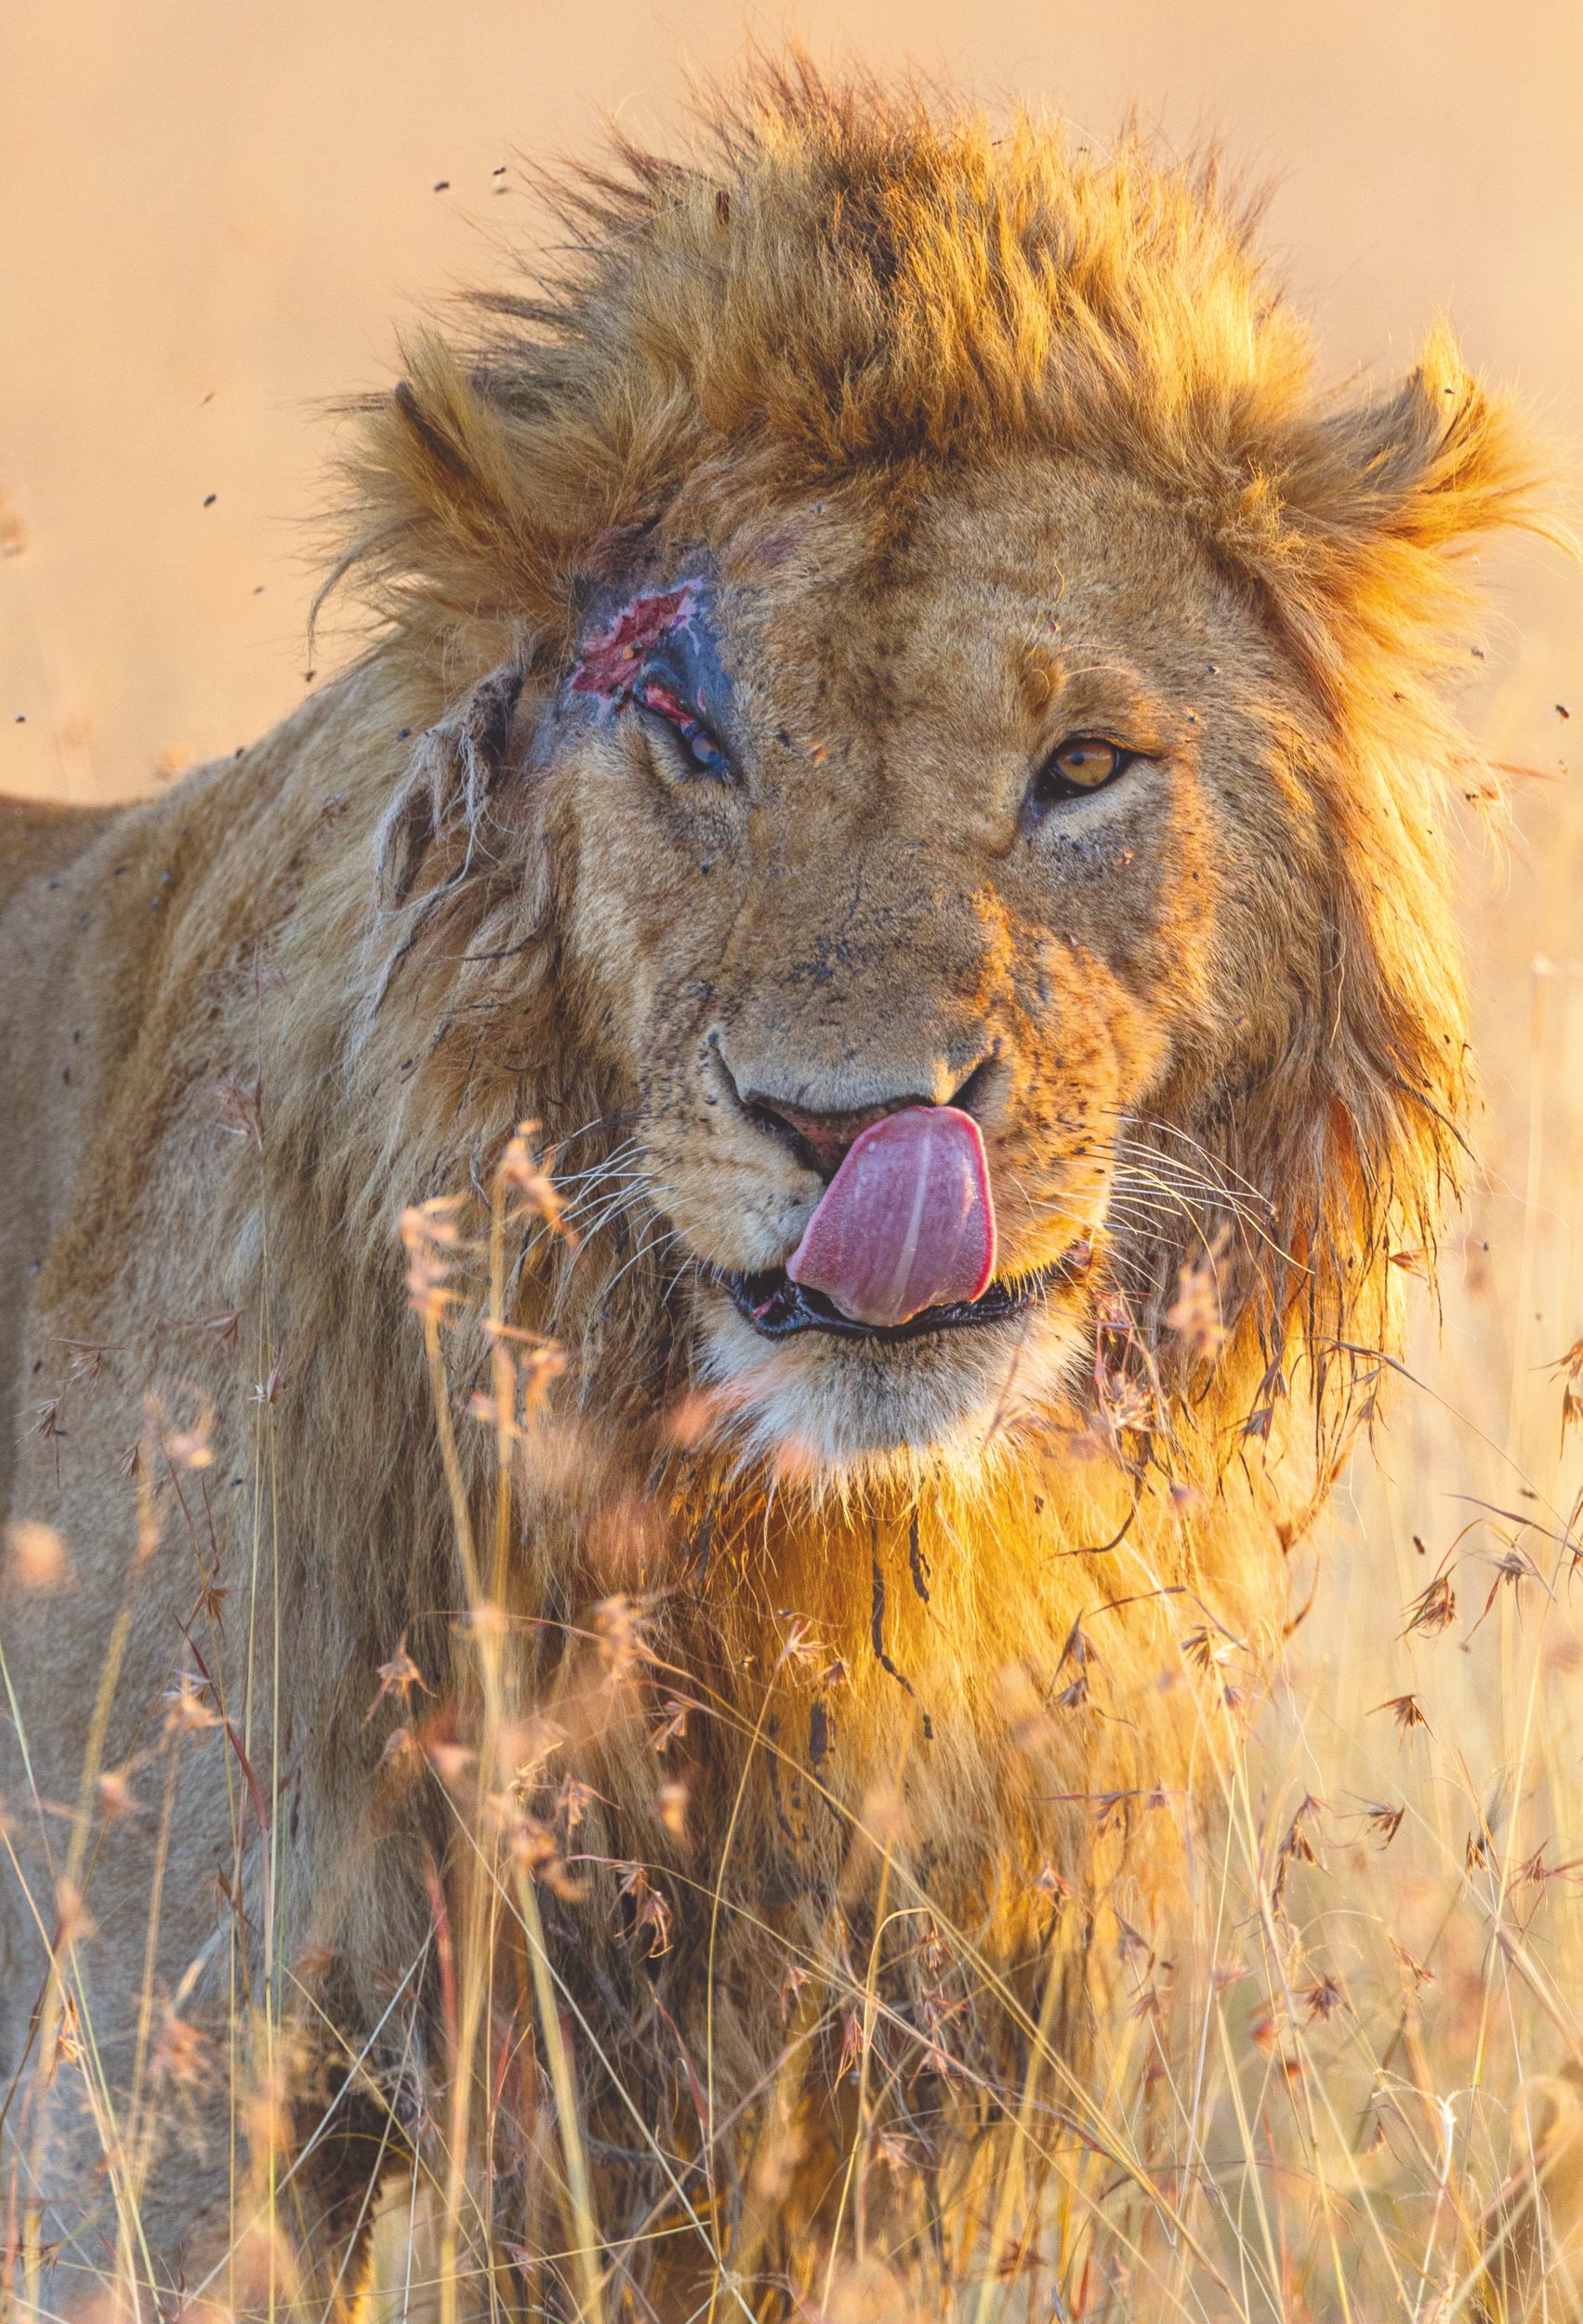 KWS Surgeons Save Iconic Lion Injured in a Warthog Attack From Jaws of Death